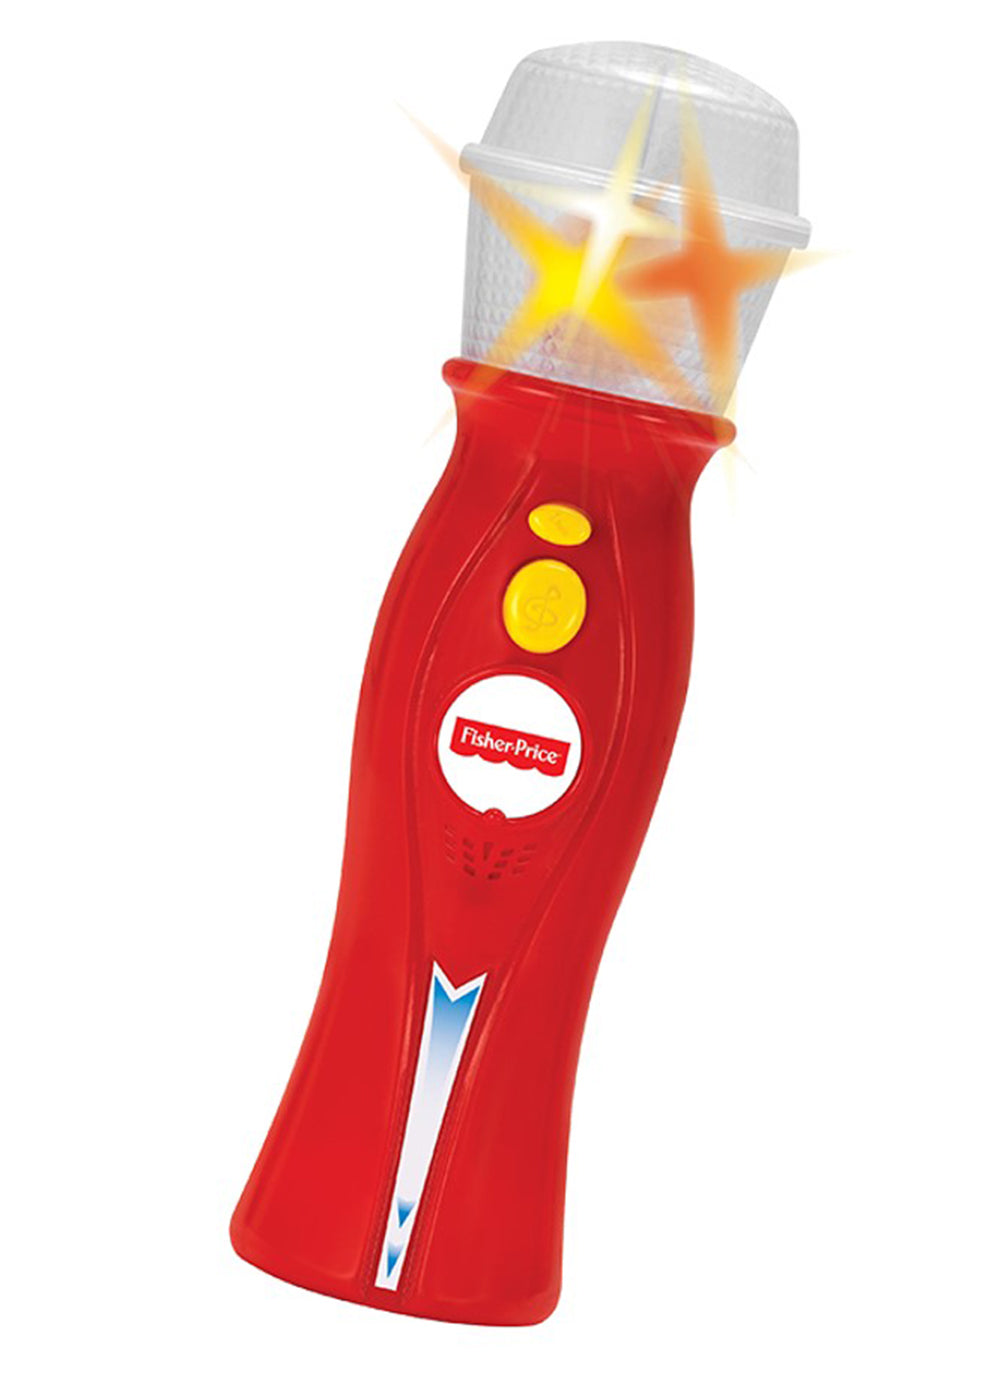 fisher price microphone sing along